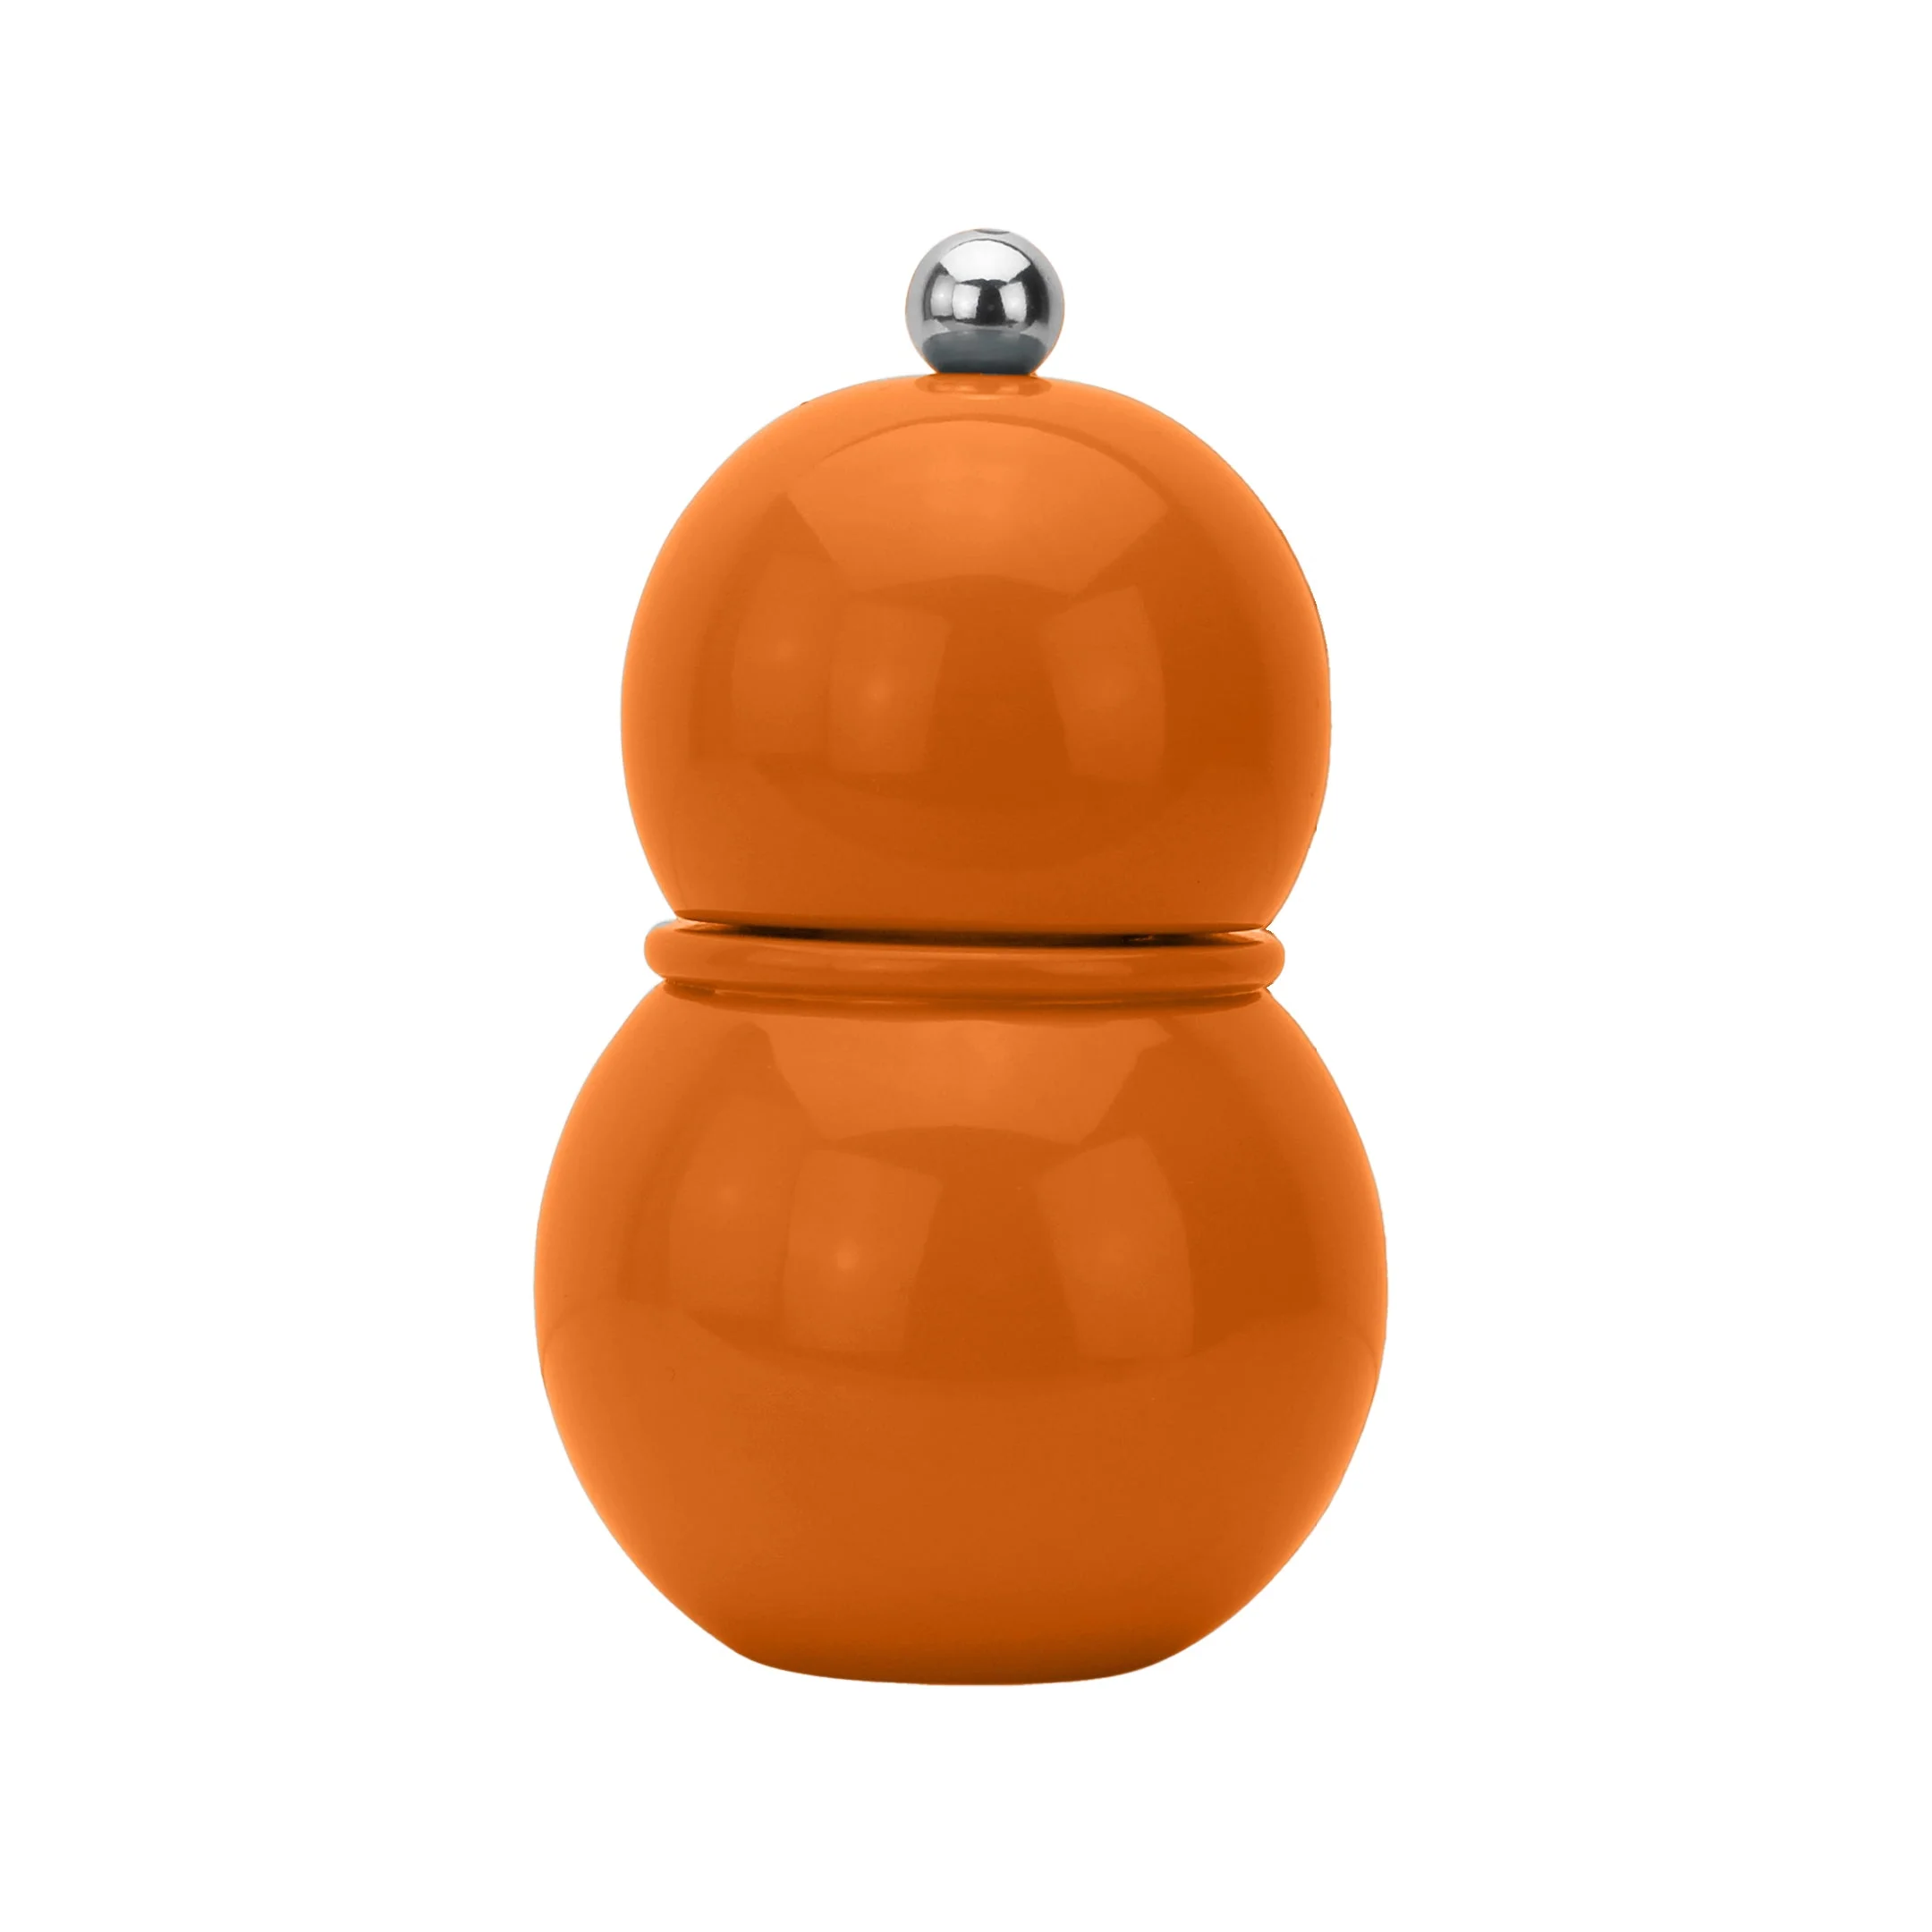 addison-ross-orange-lacquer-chubby-salt-and-pepper-grinder